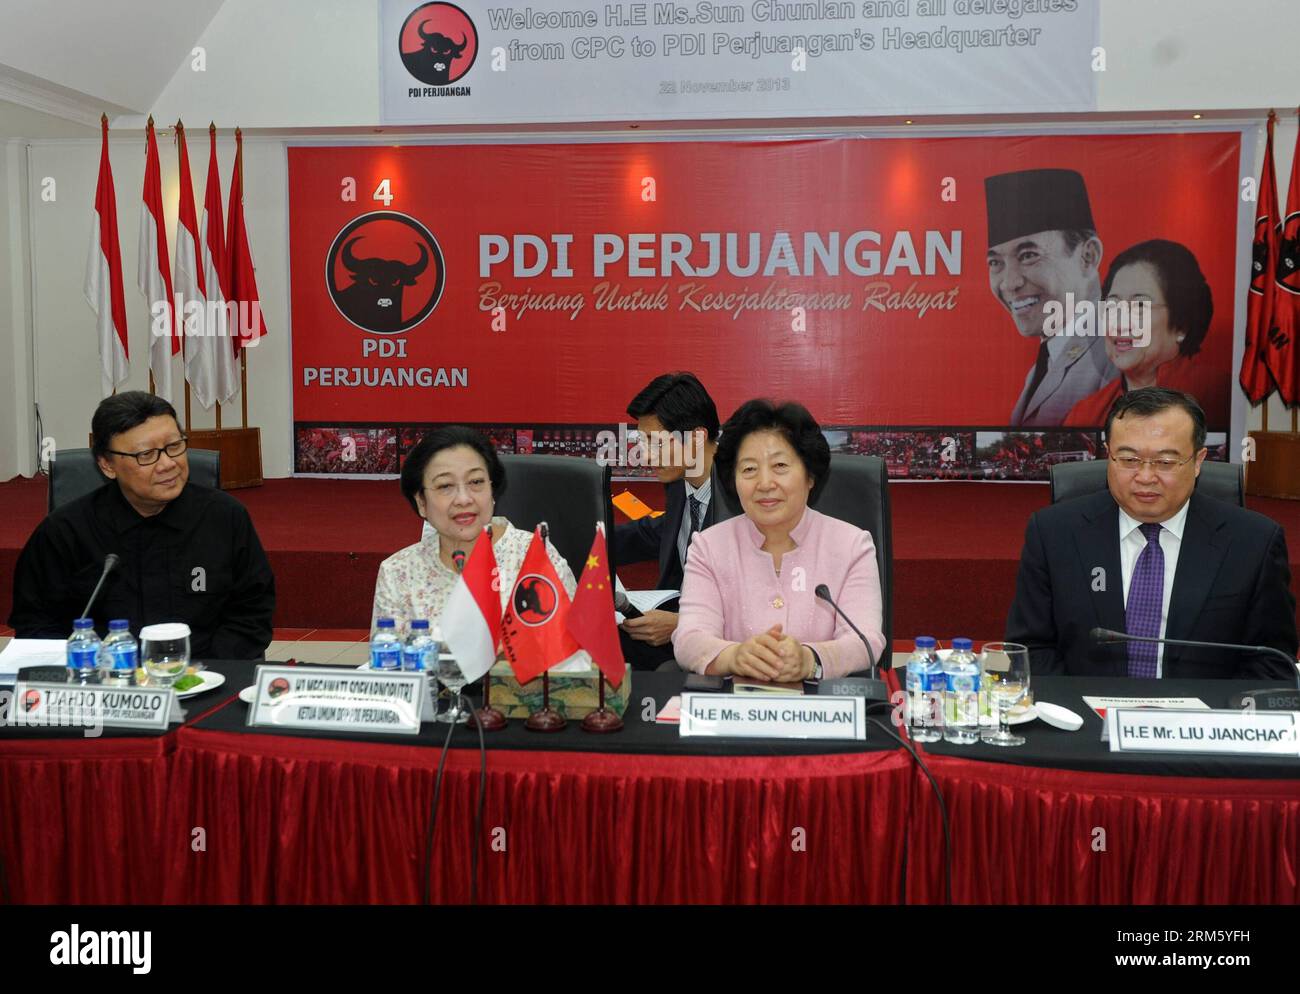 Bildnummer: 60745059  Datum: 22.11.2013  Copyright: imago/Xinhua     Sun Chunlan (2nd R), a member of the Political Bureau of the Central Committee of the Communist Party of China (CPC), meets with Megawati Soekarnoputri (2nd L), chairperson of Indonesia Democratic Party of Struggle (PDIP) in Jakarta, Indonesia, Nov. 22, 2013. (Xinhua/Jiang Fan) INDONESIA-CHINA-SUN CHUNLAN-MEGAWATI-MEETING PUBLICATIONxNOTxINxCHN People Politik x0x xrj 2013 quer Stock Photo